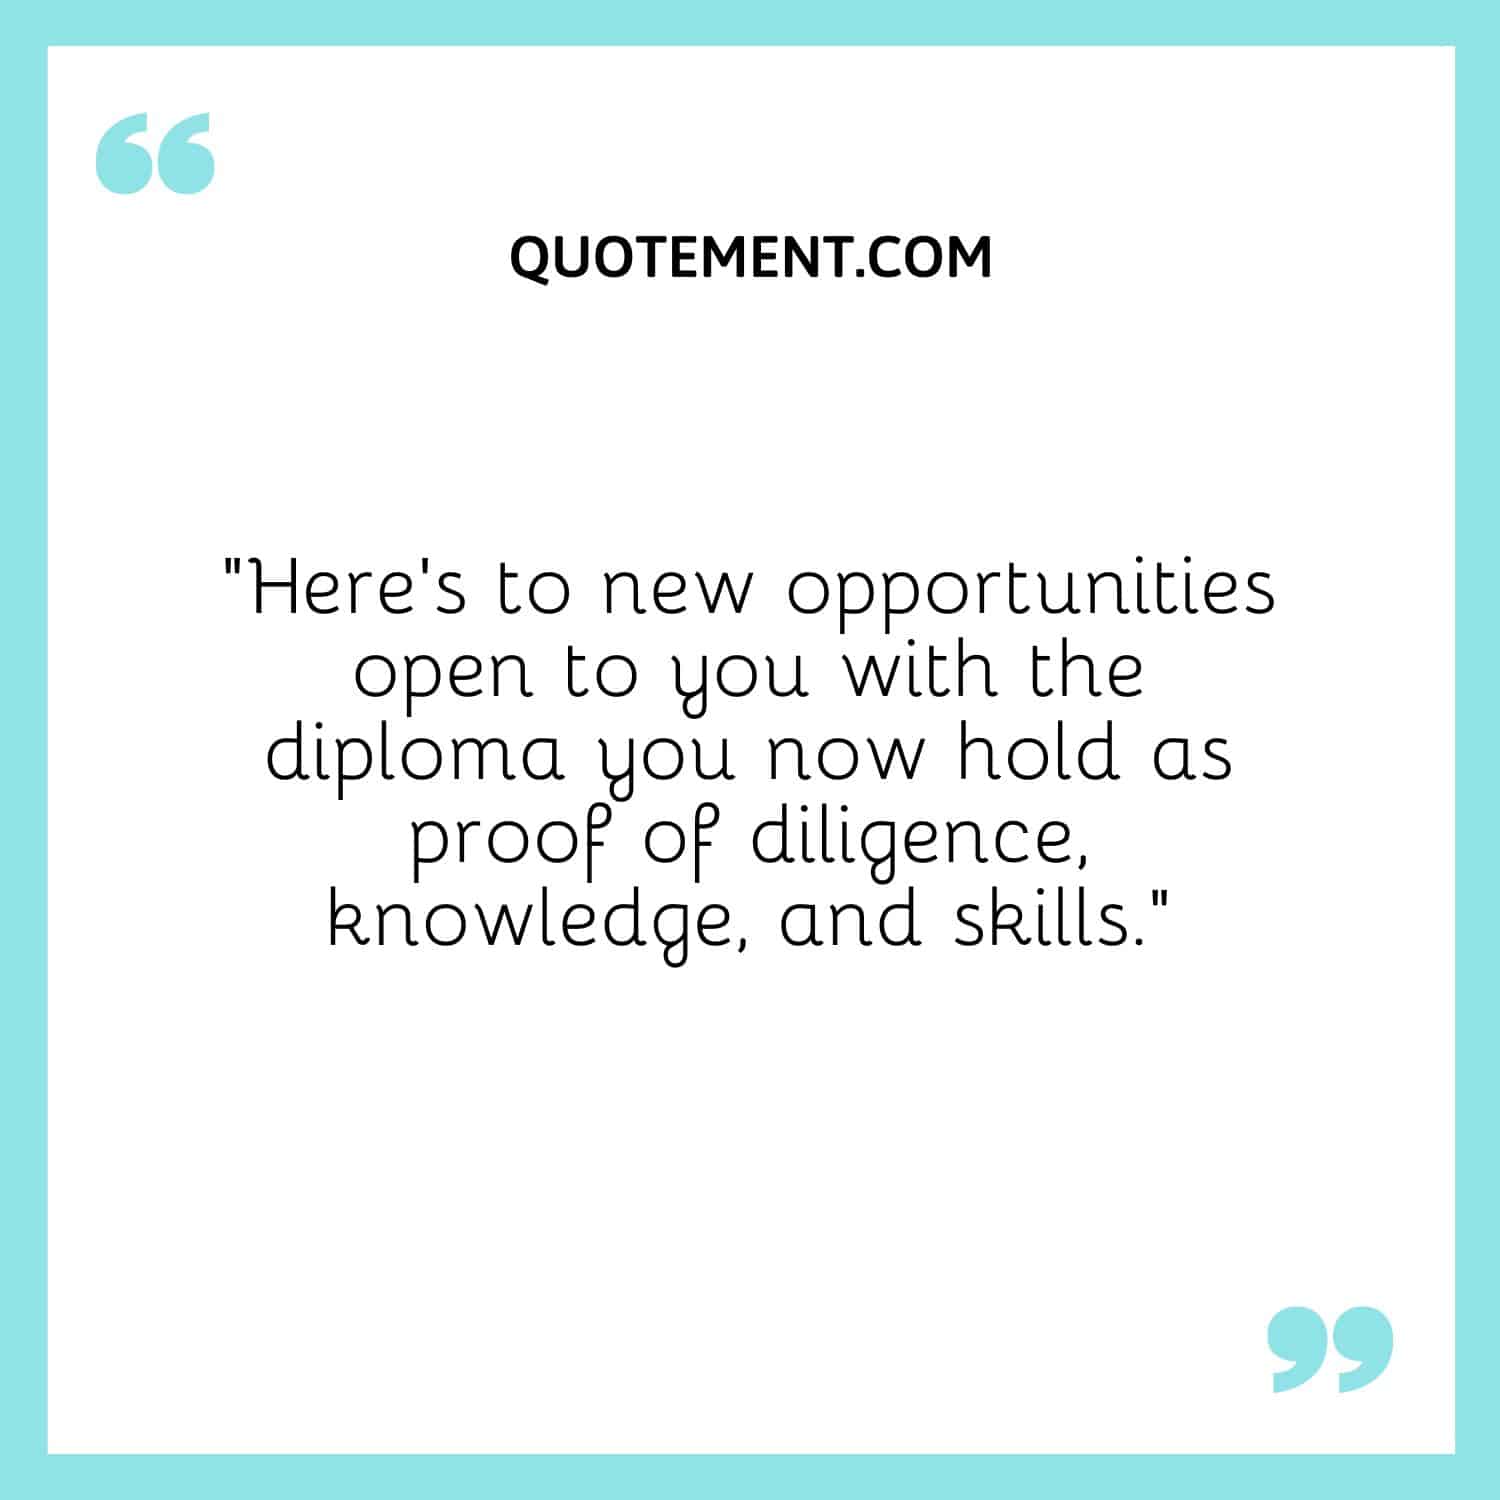 “Here’s to new opportunities open to you with the diploma you now hold as proof of diligence, knowledge, and skills.”